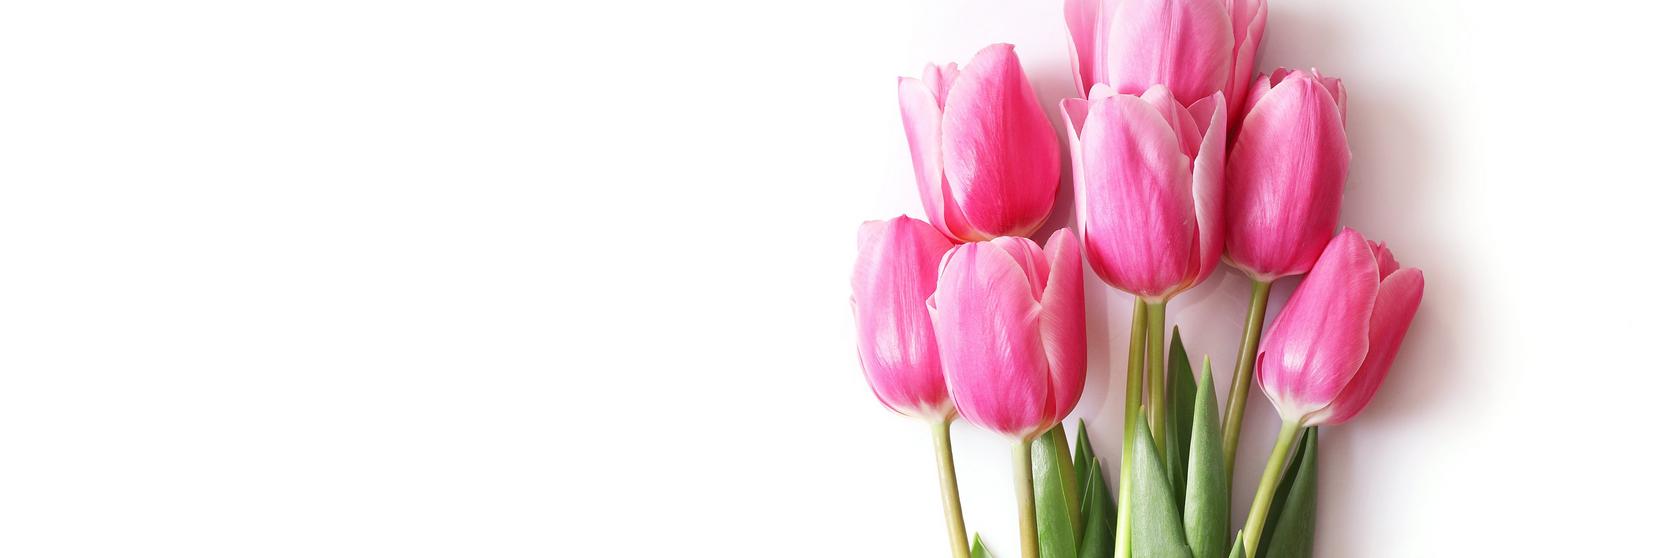 tulips-pink-flowers